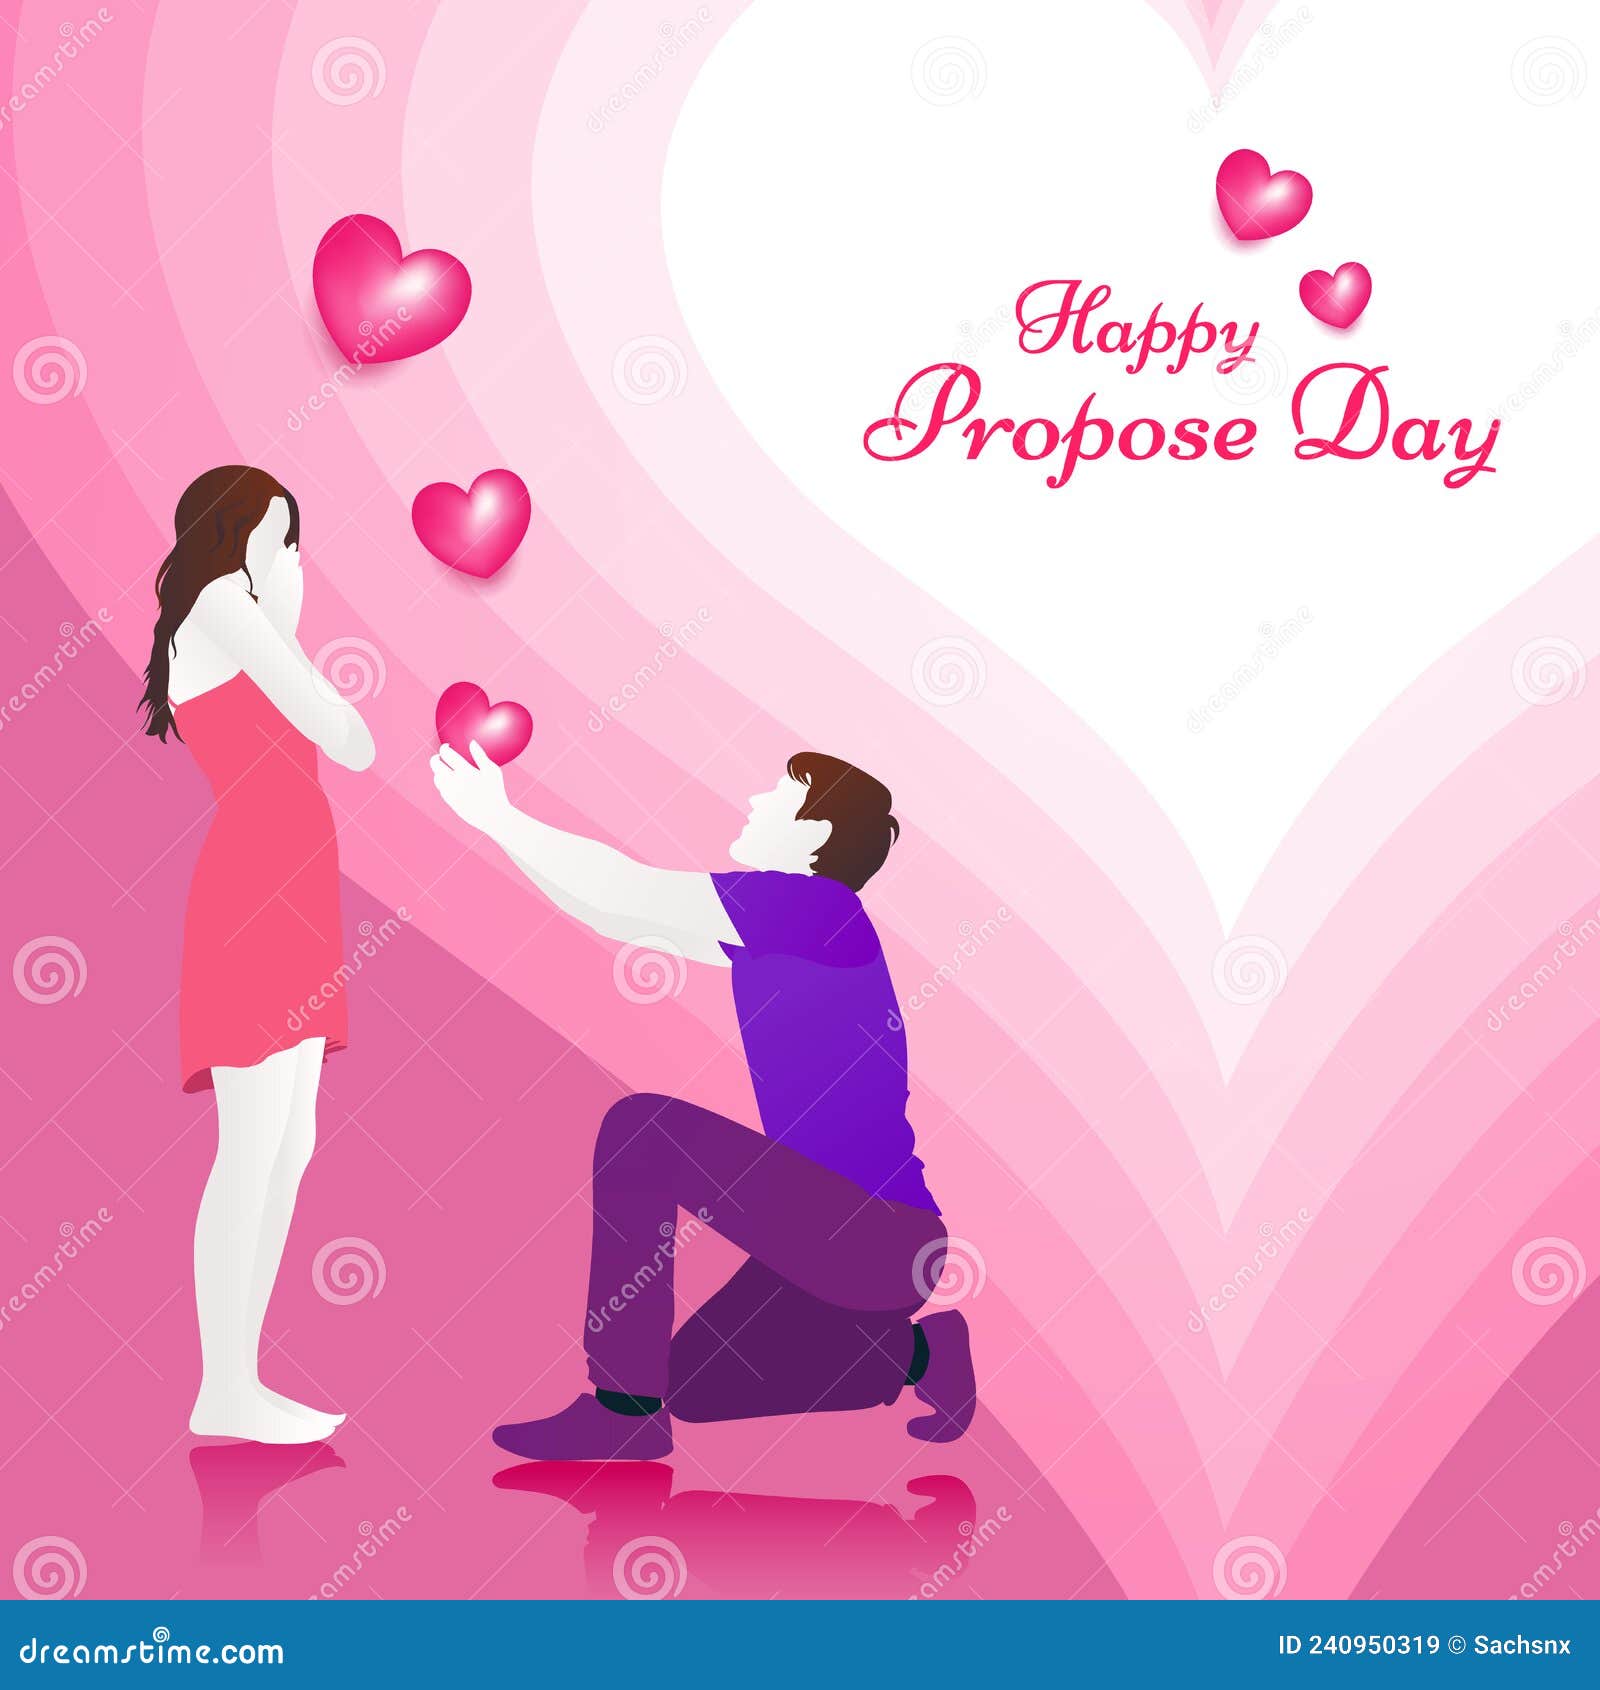 young man proposing his girlfriend propose day valentine week beautiful romantic background lovable couple vector 240950319